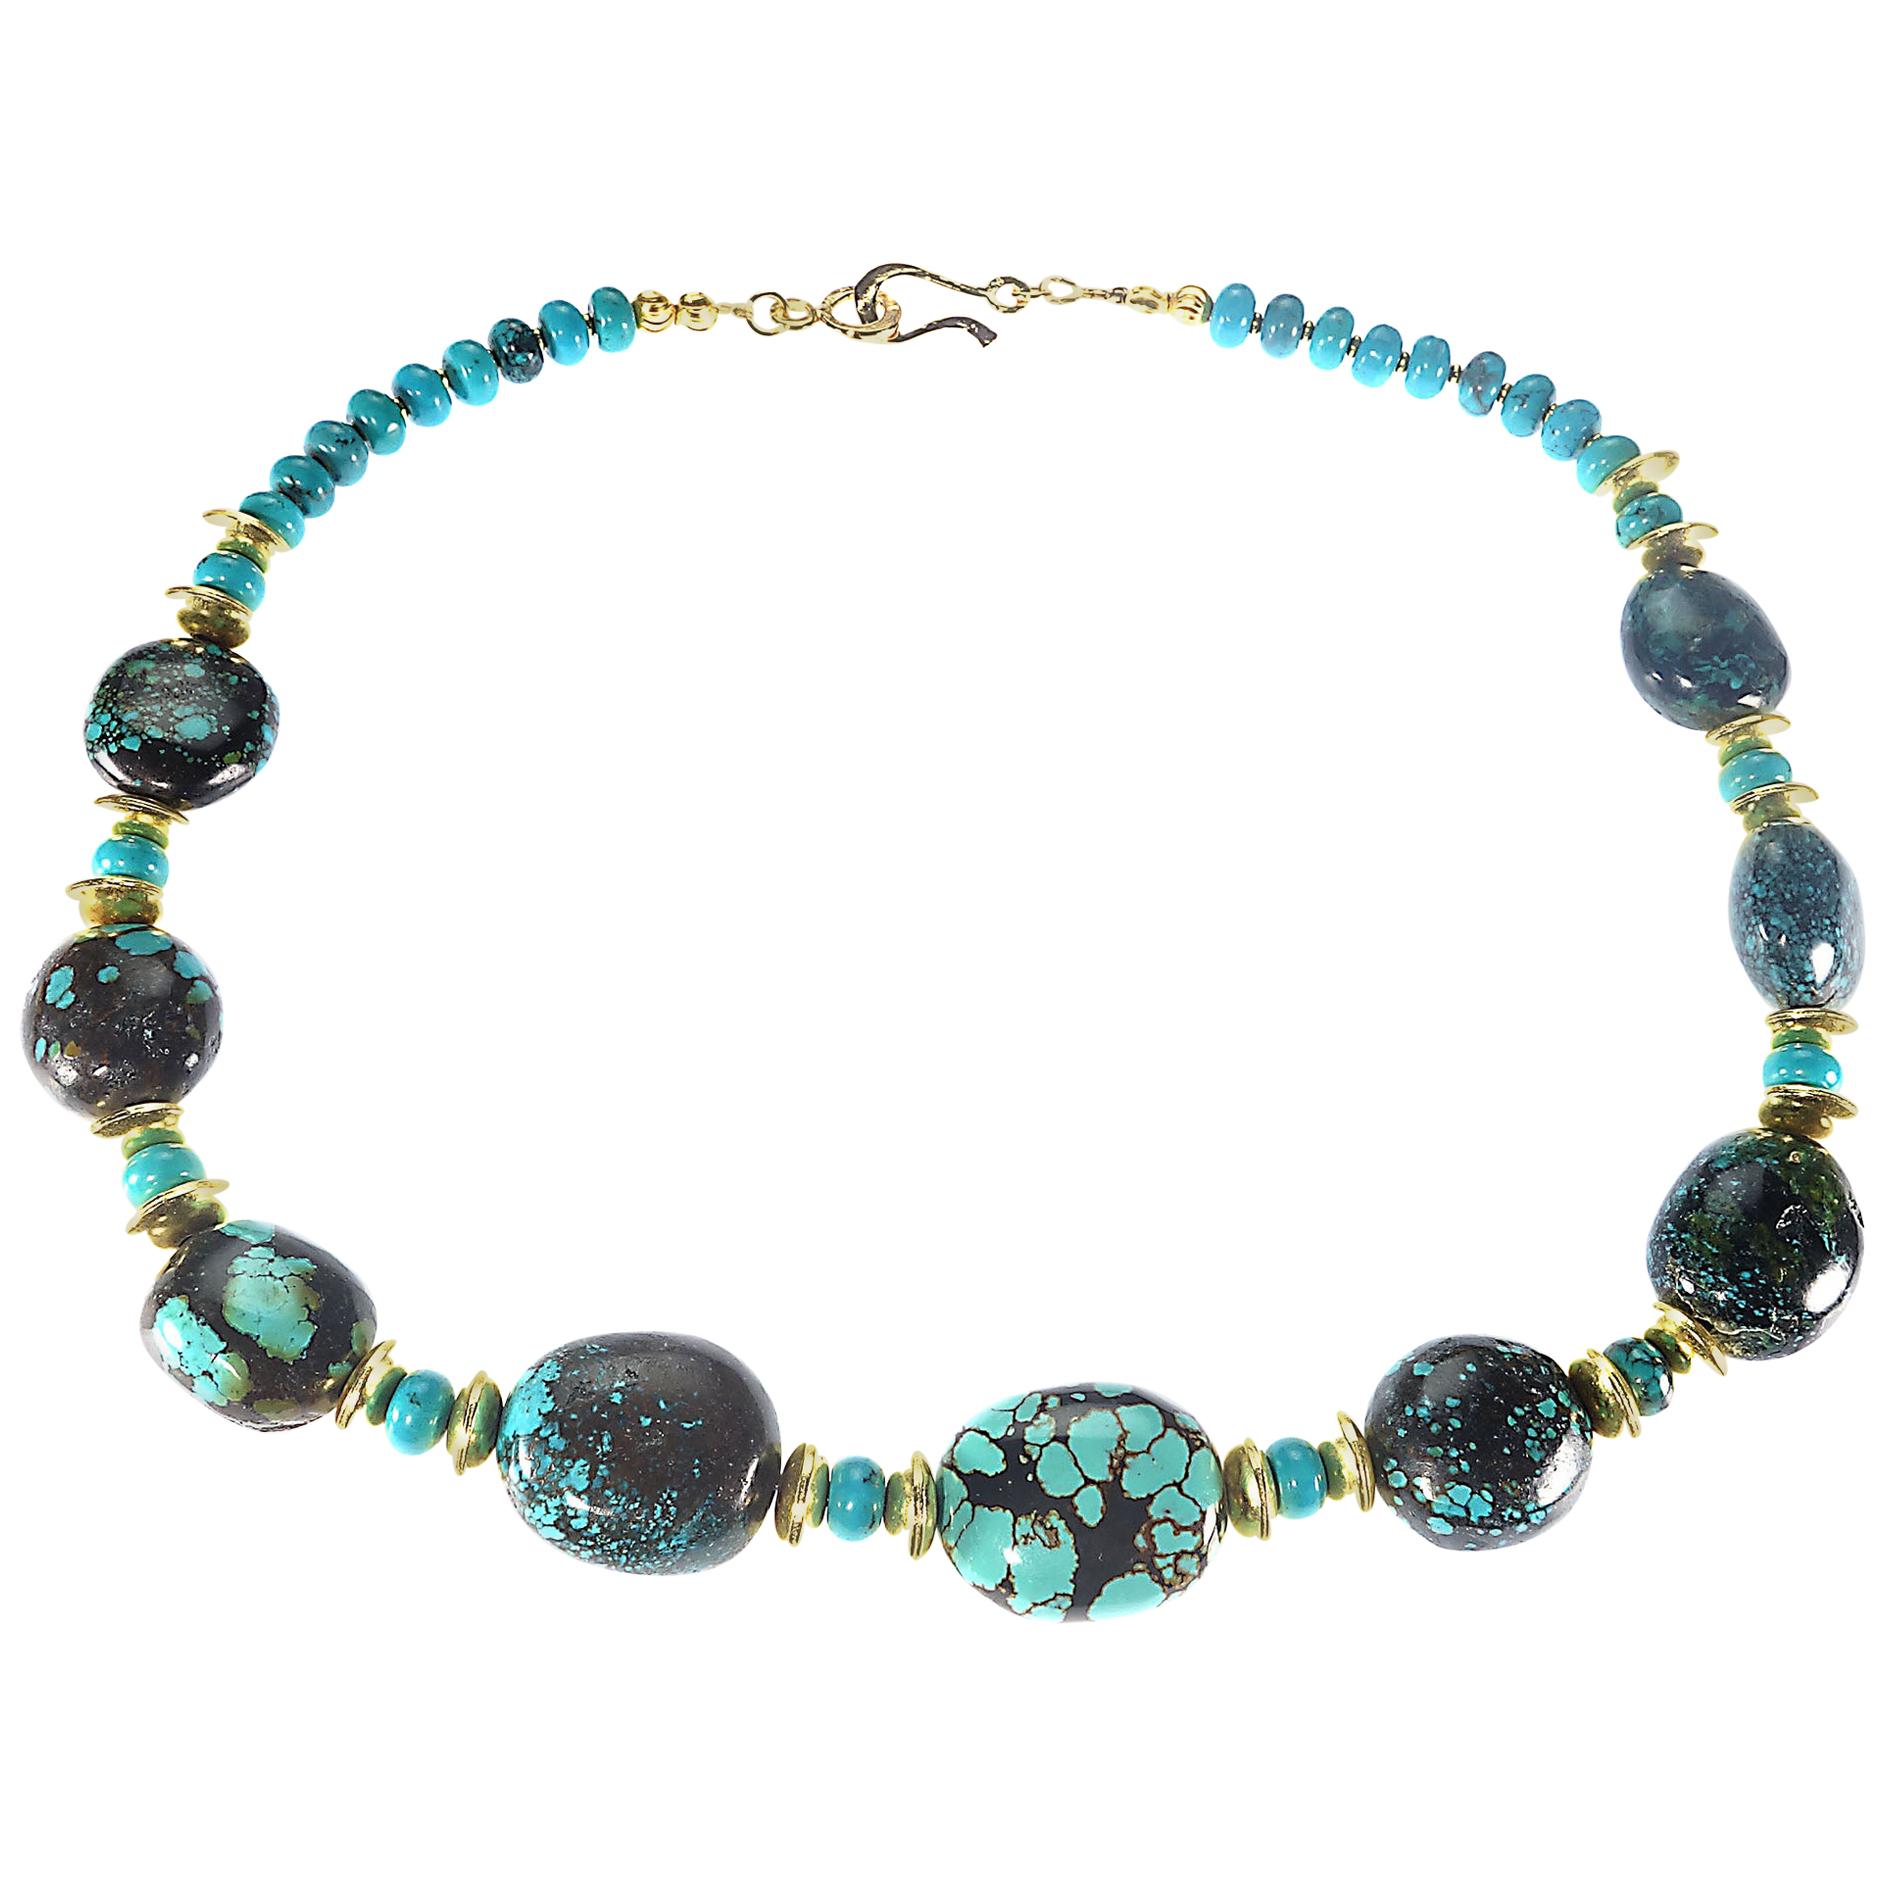 Women's or Men's AJD Stunning Hubei Turquoise Necklace with Gold Accents